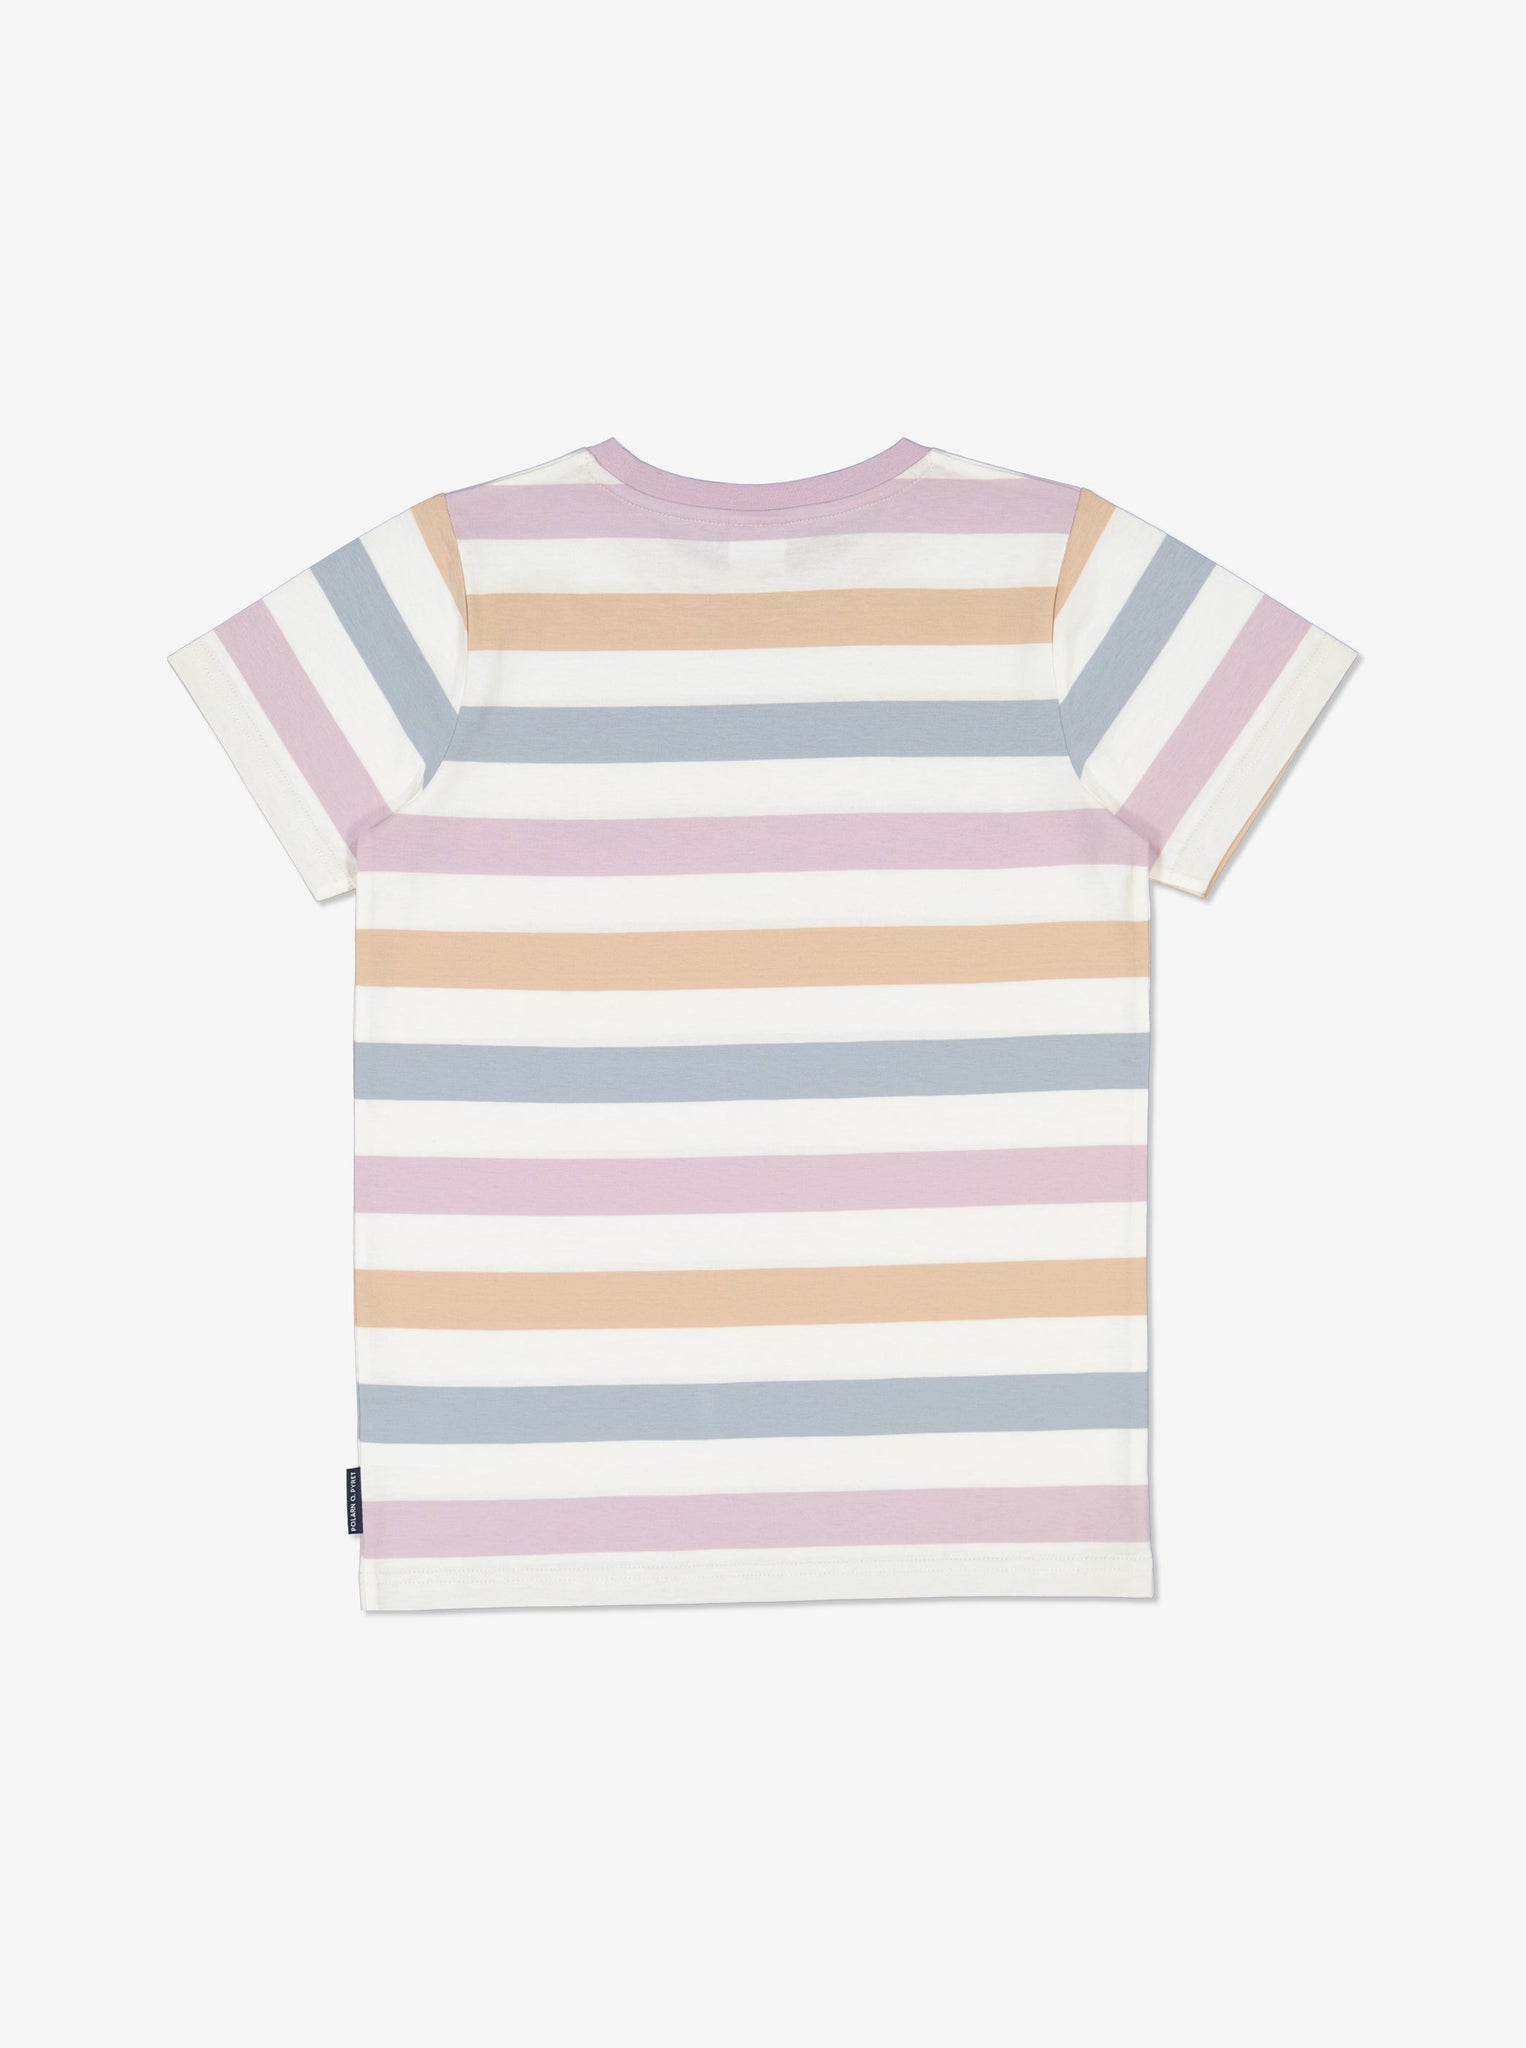  Pink Striped Kids T-Shirt from Polarn O. Pyret Kidswear. Made using sustainable materials.